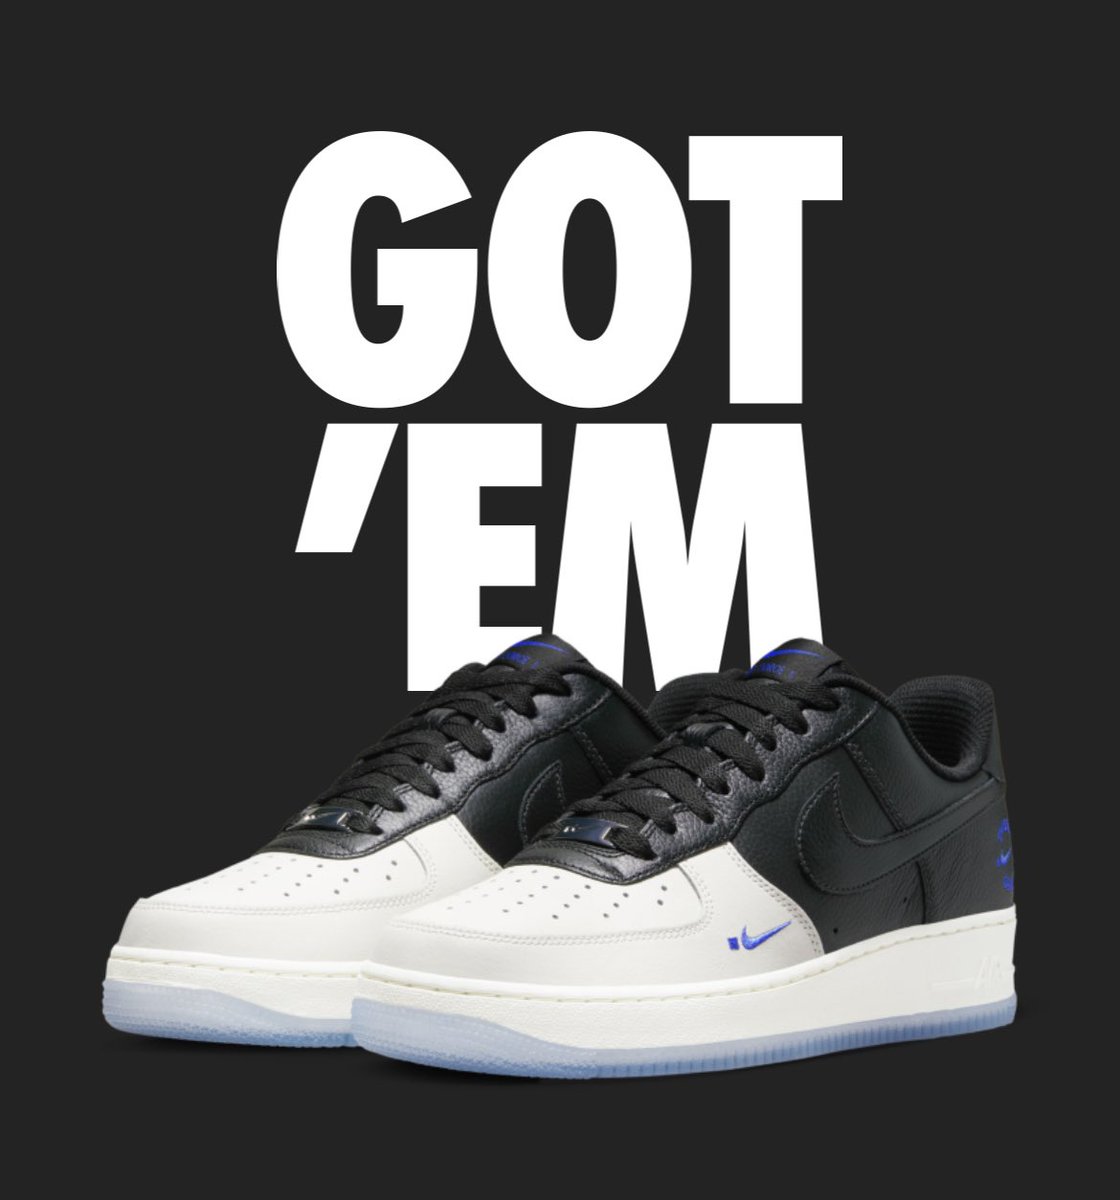 Caught 2 out of 3 #TINAJ & #404error sneaker drops at @dotSWOOSH ! Who’s the ultimate sneakercollector snagging all three? Let’s see those collections! 🏆